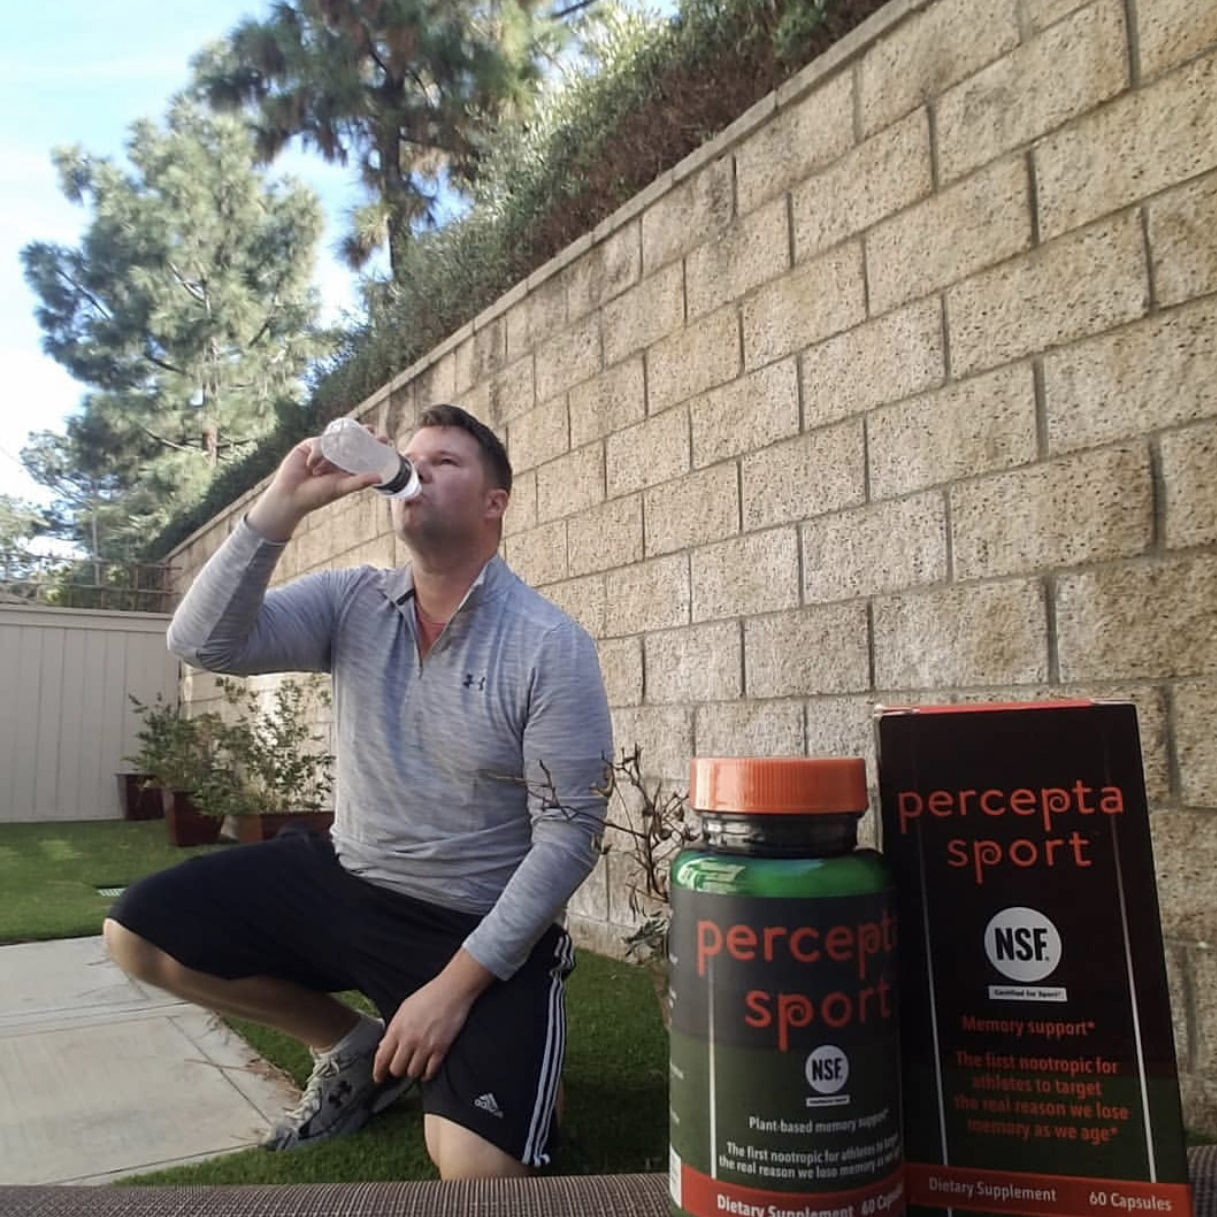 Man drinking water with boxes of percepta sport in front of him